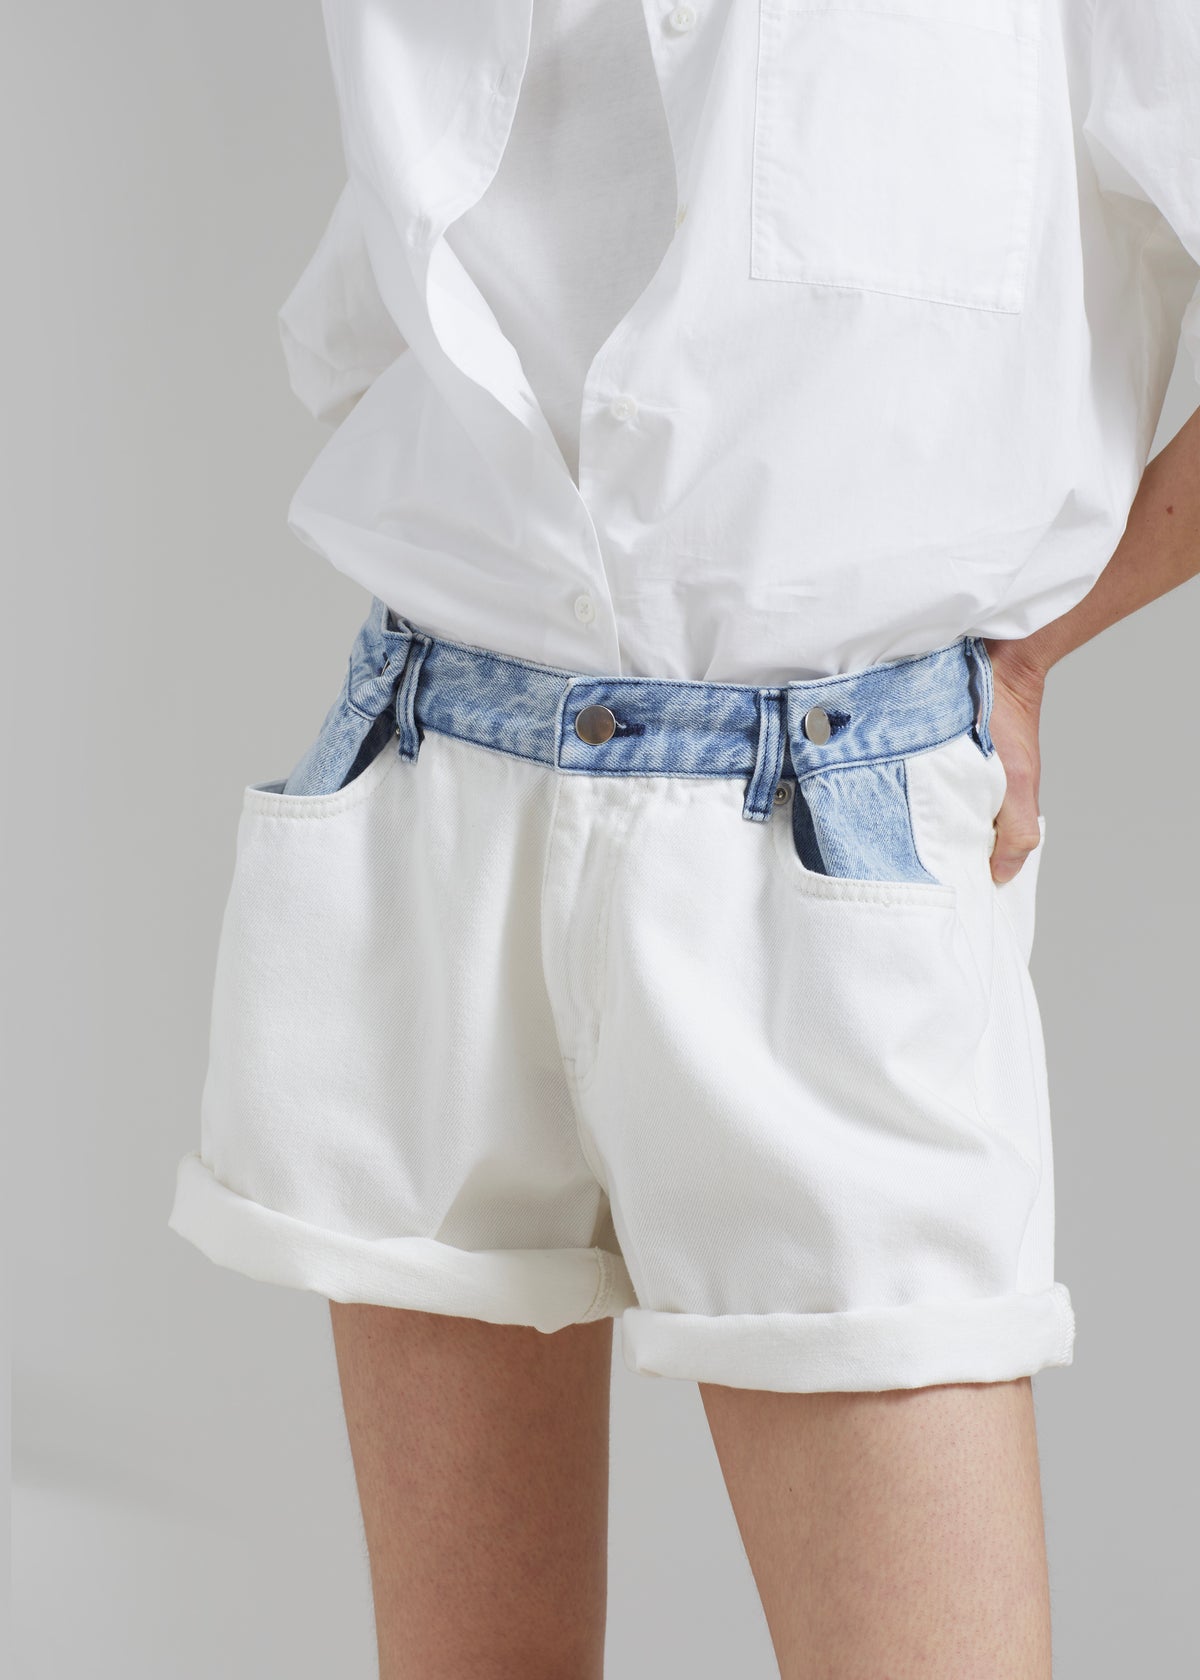 Shorts receive - discount Frankie more Denim Contrast Shop The you larger you White/Blue the The buy, Hayla will Off